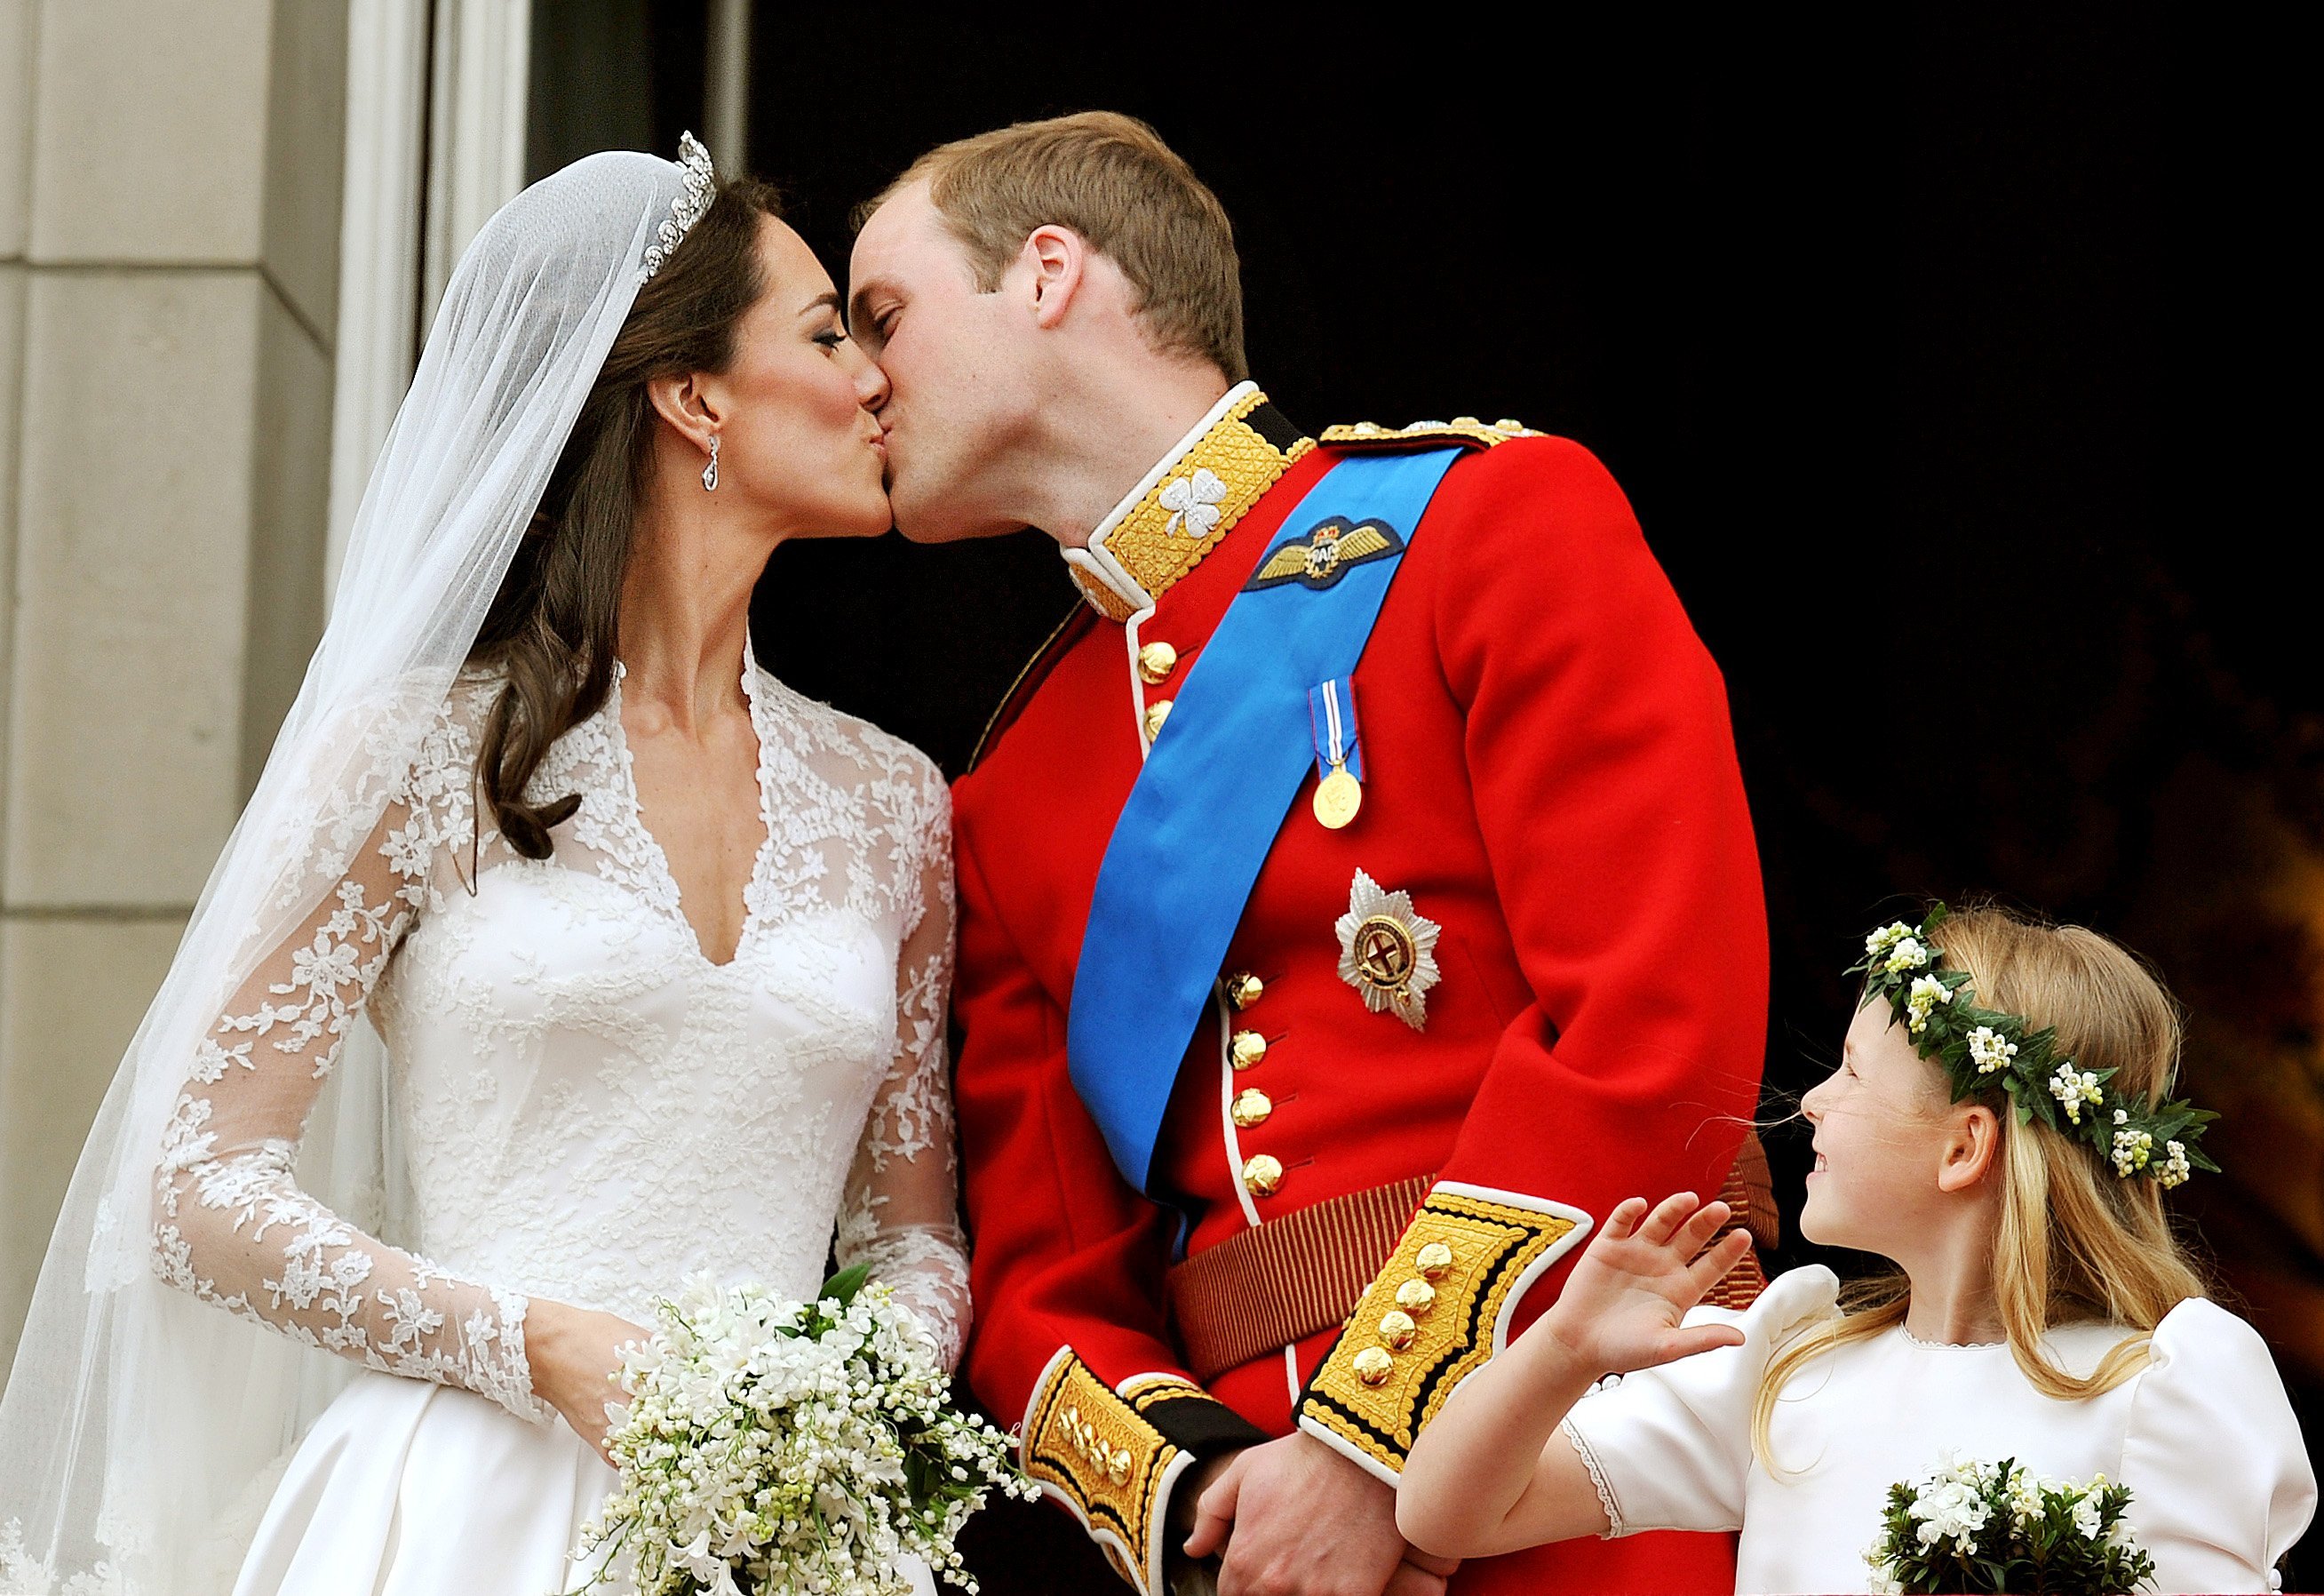 Prince William and Kate Middlleton kiss on the balcony of Buckingham Palace after getting married on April 29, 2011. | Photo: GettyImages